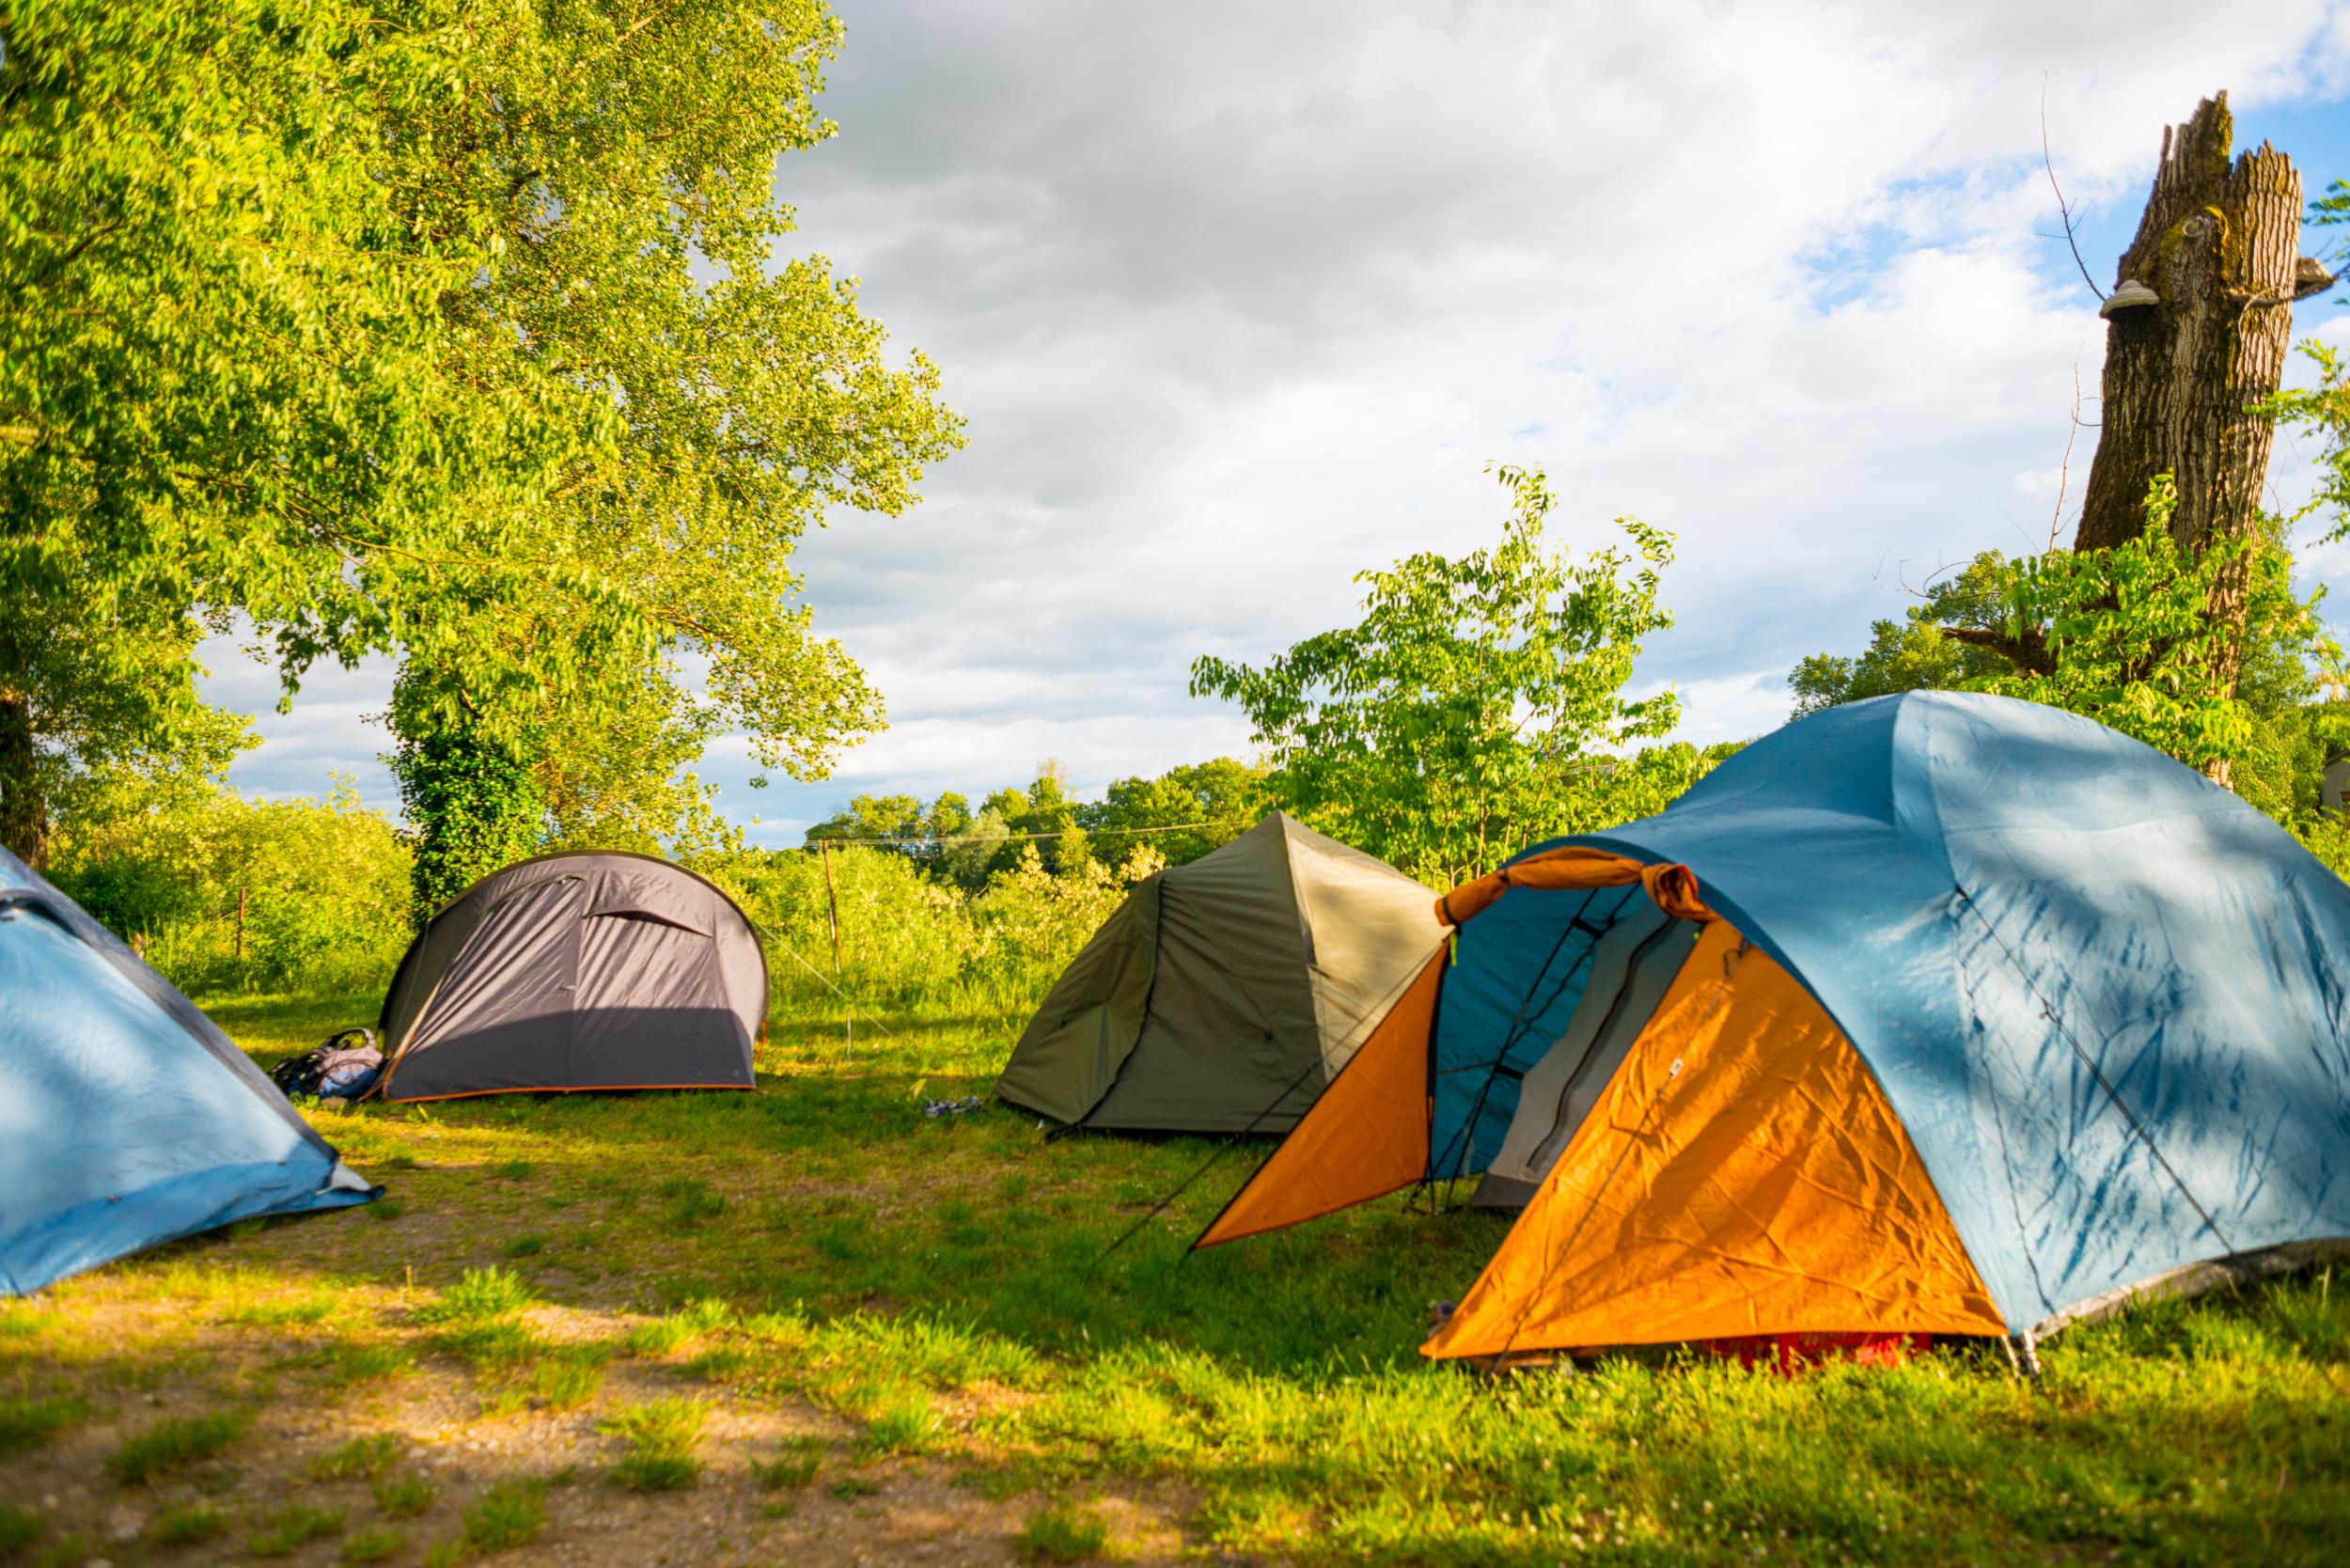 Camping offers good value and being a drive away from the UK can be reassuring